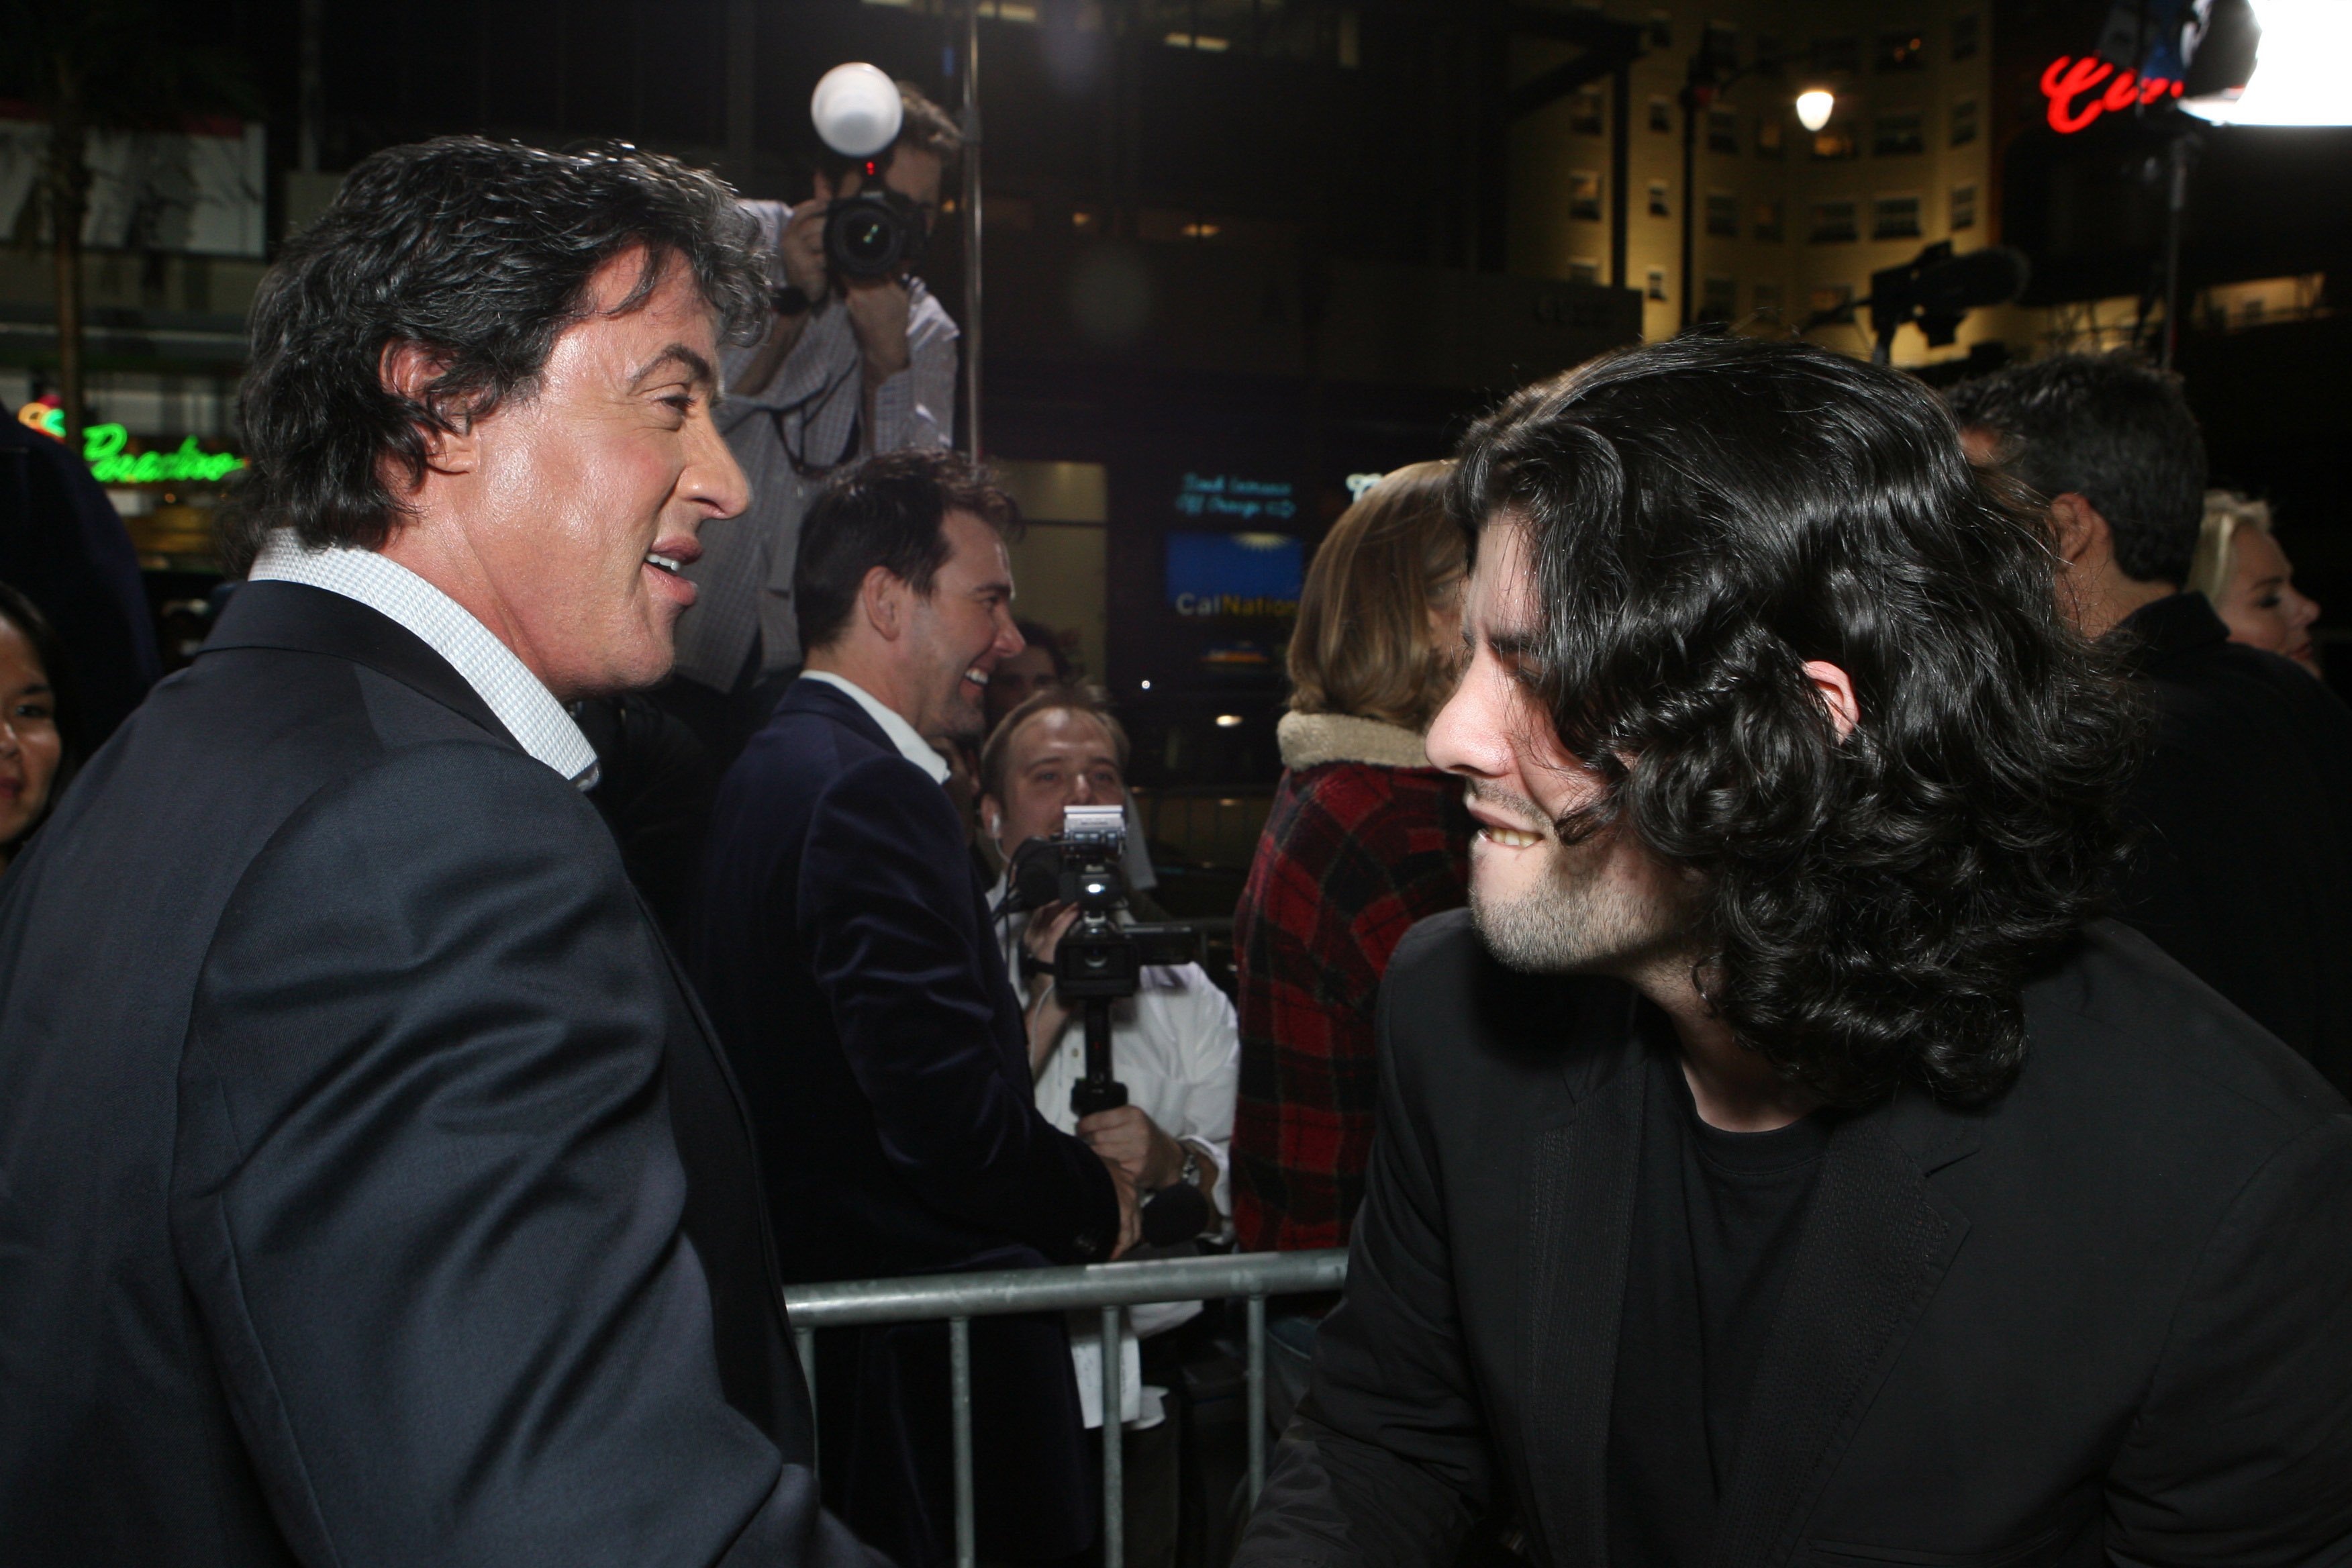 Sylvester and Sage Stallone during the world premiere of "Rocky Balboa" in Hollywood, California, on December 13, 2006. | Source: Getty Images